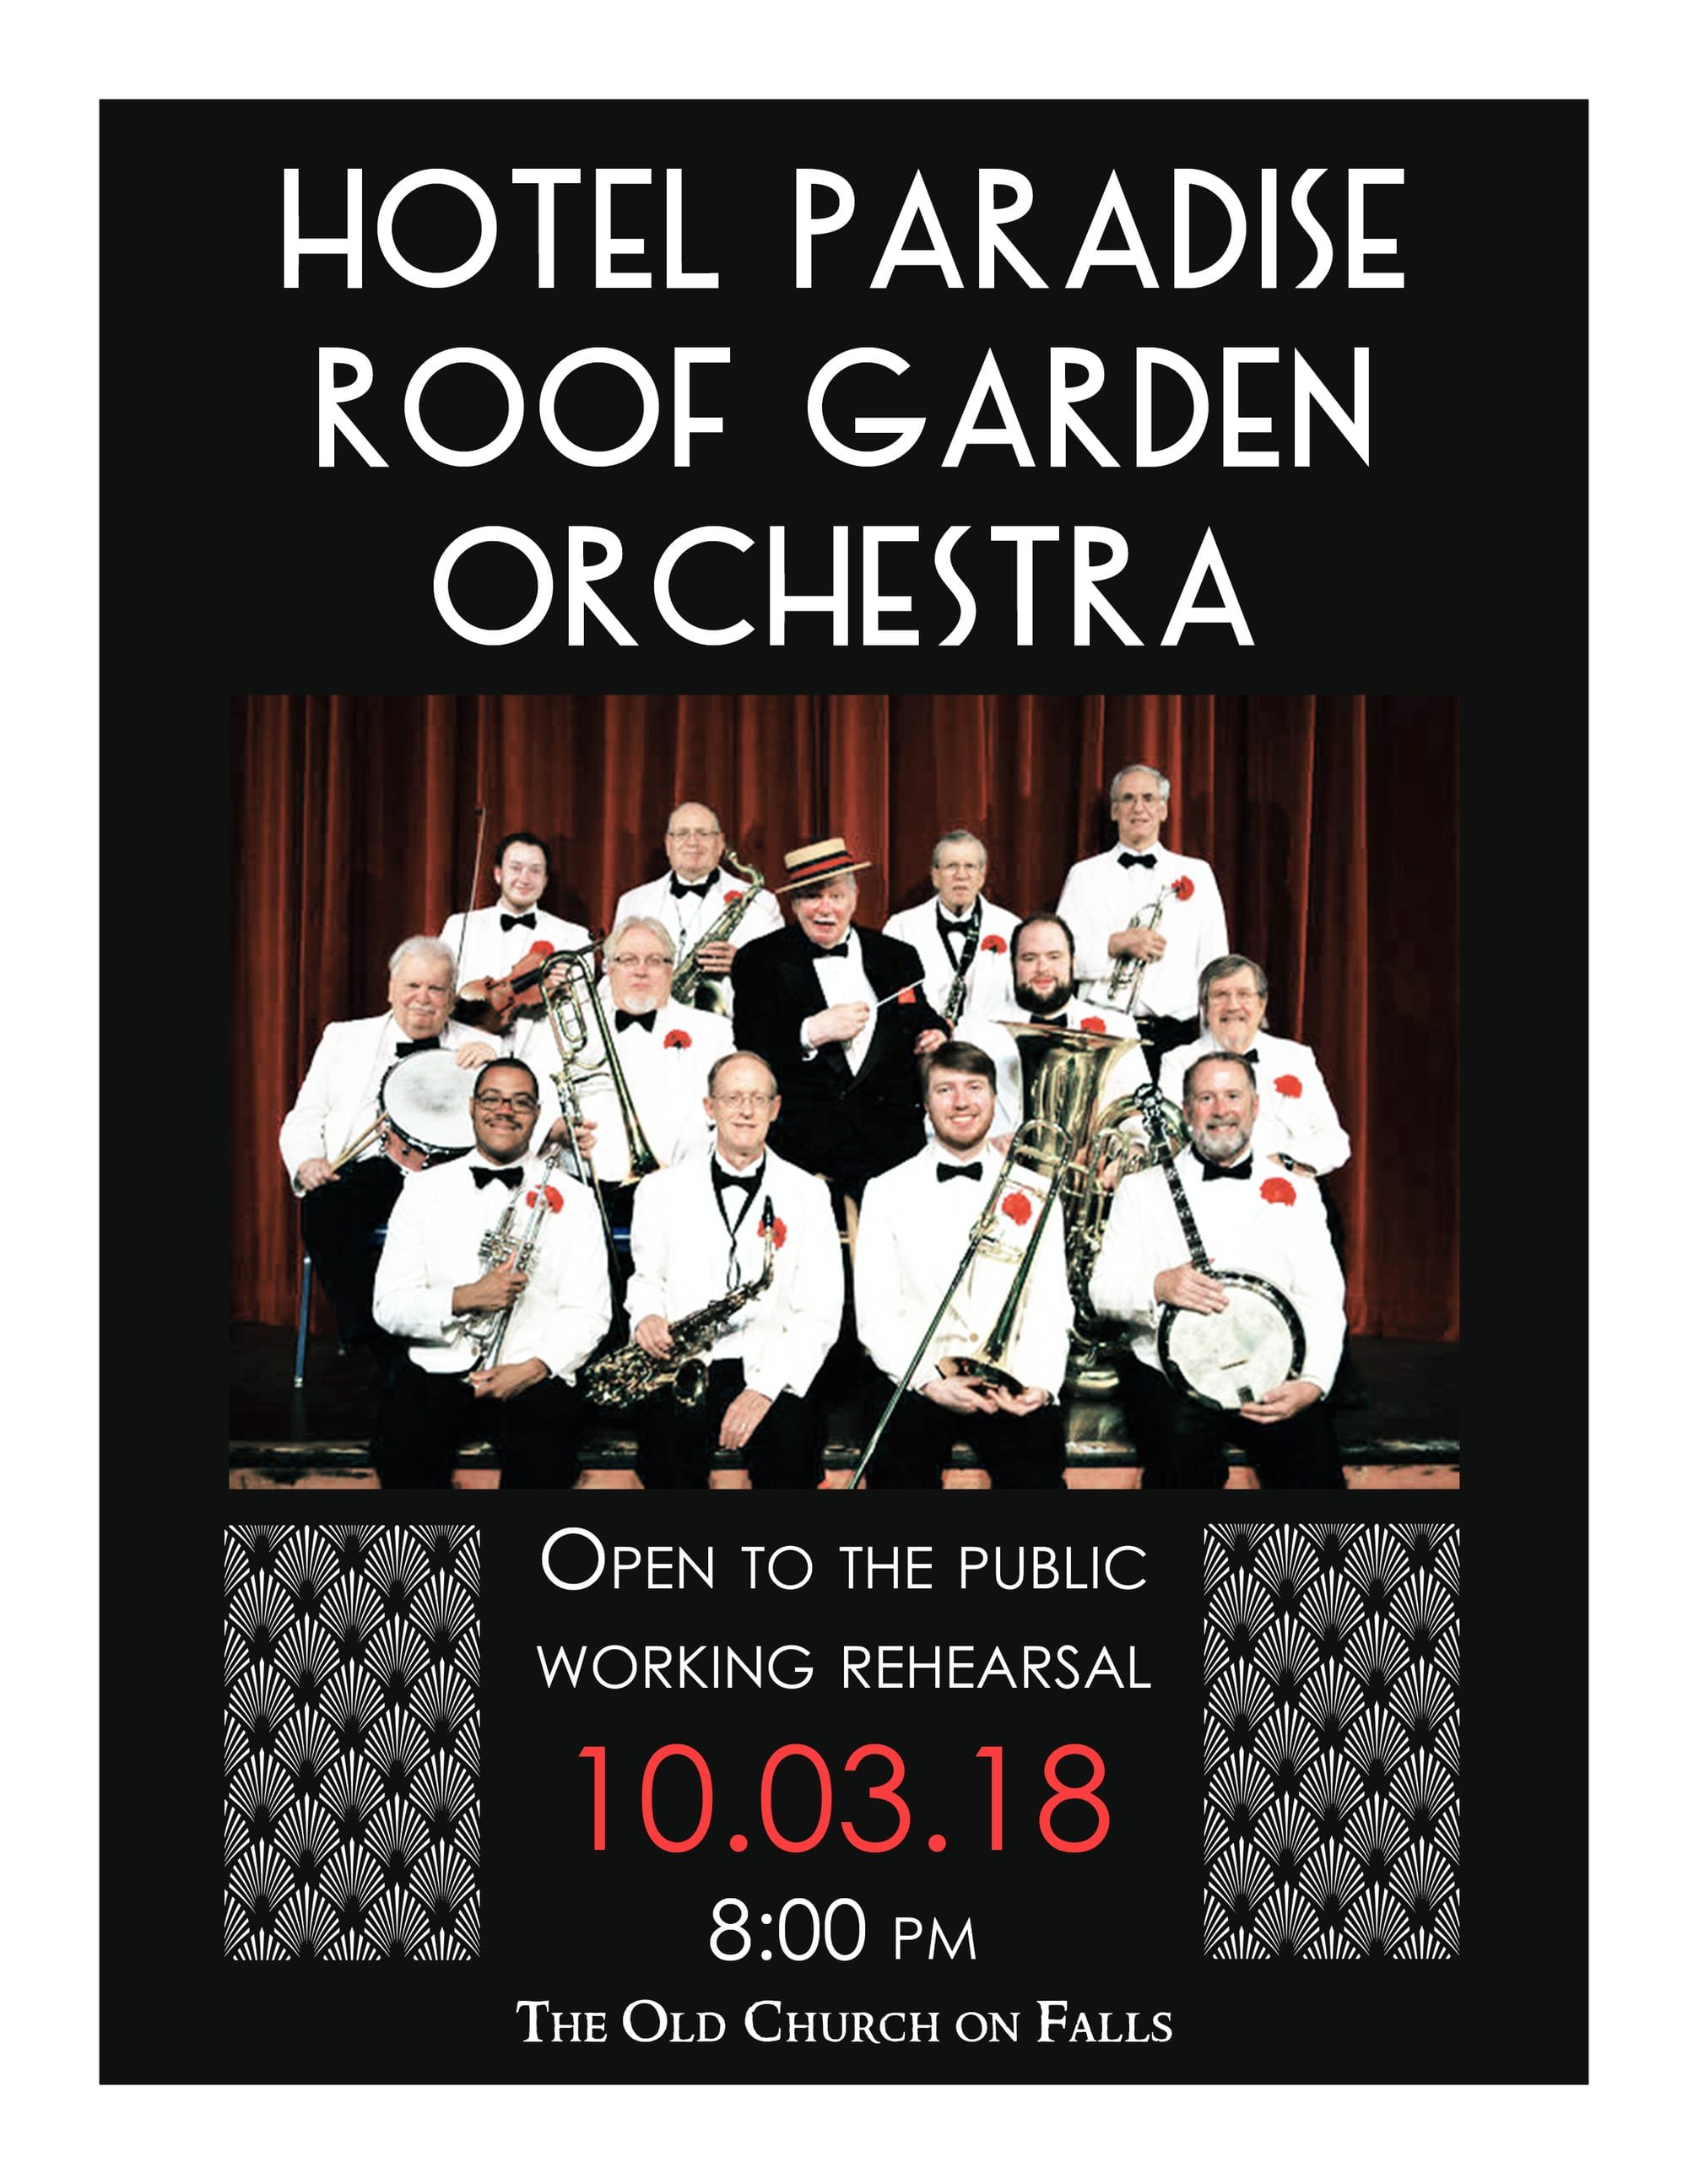 Hotel Paradise Roof Garden Orchestra